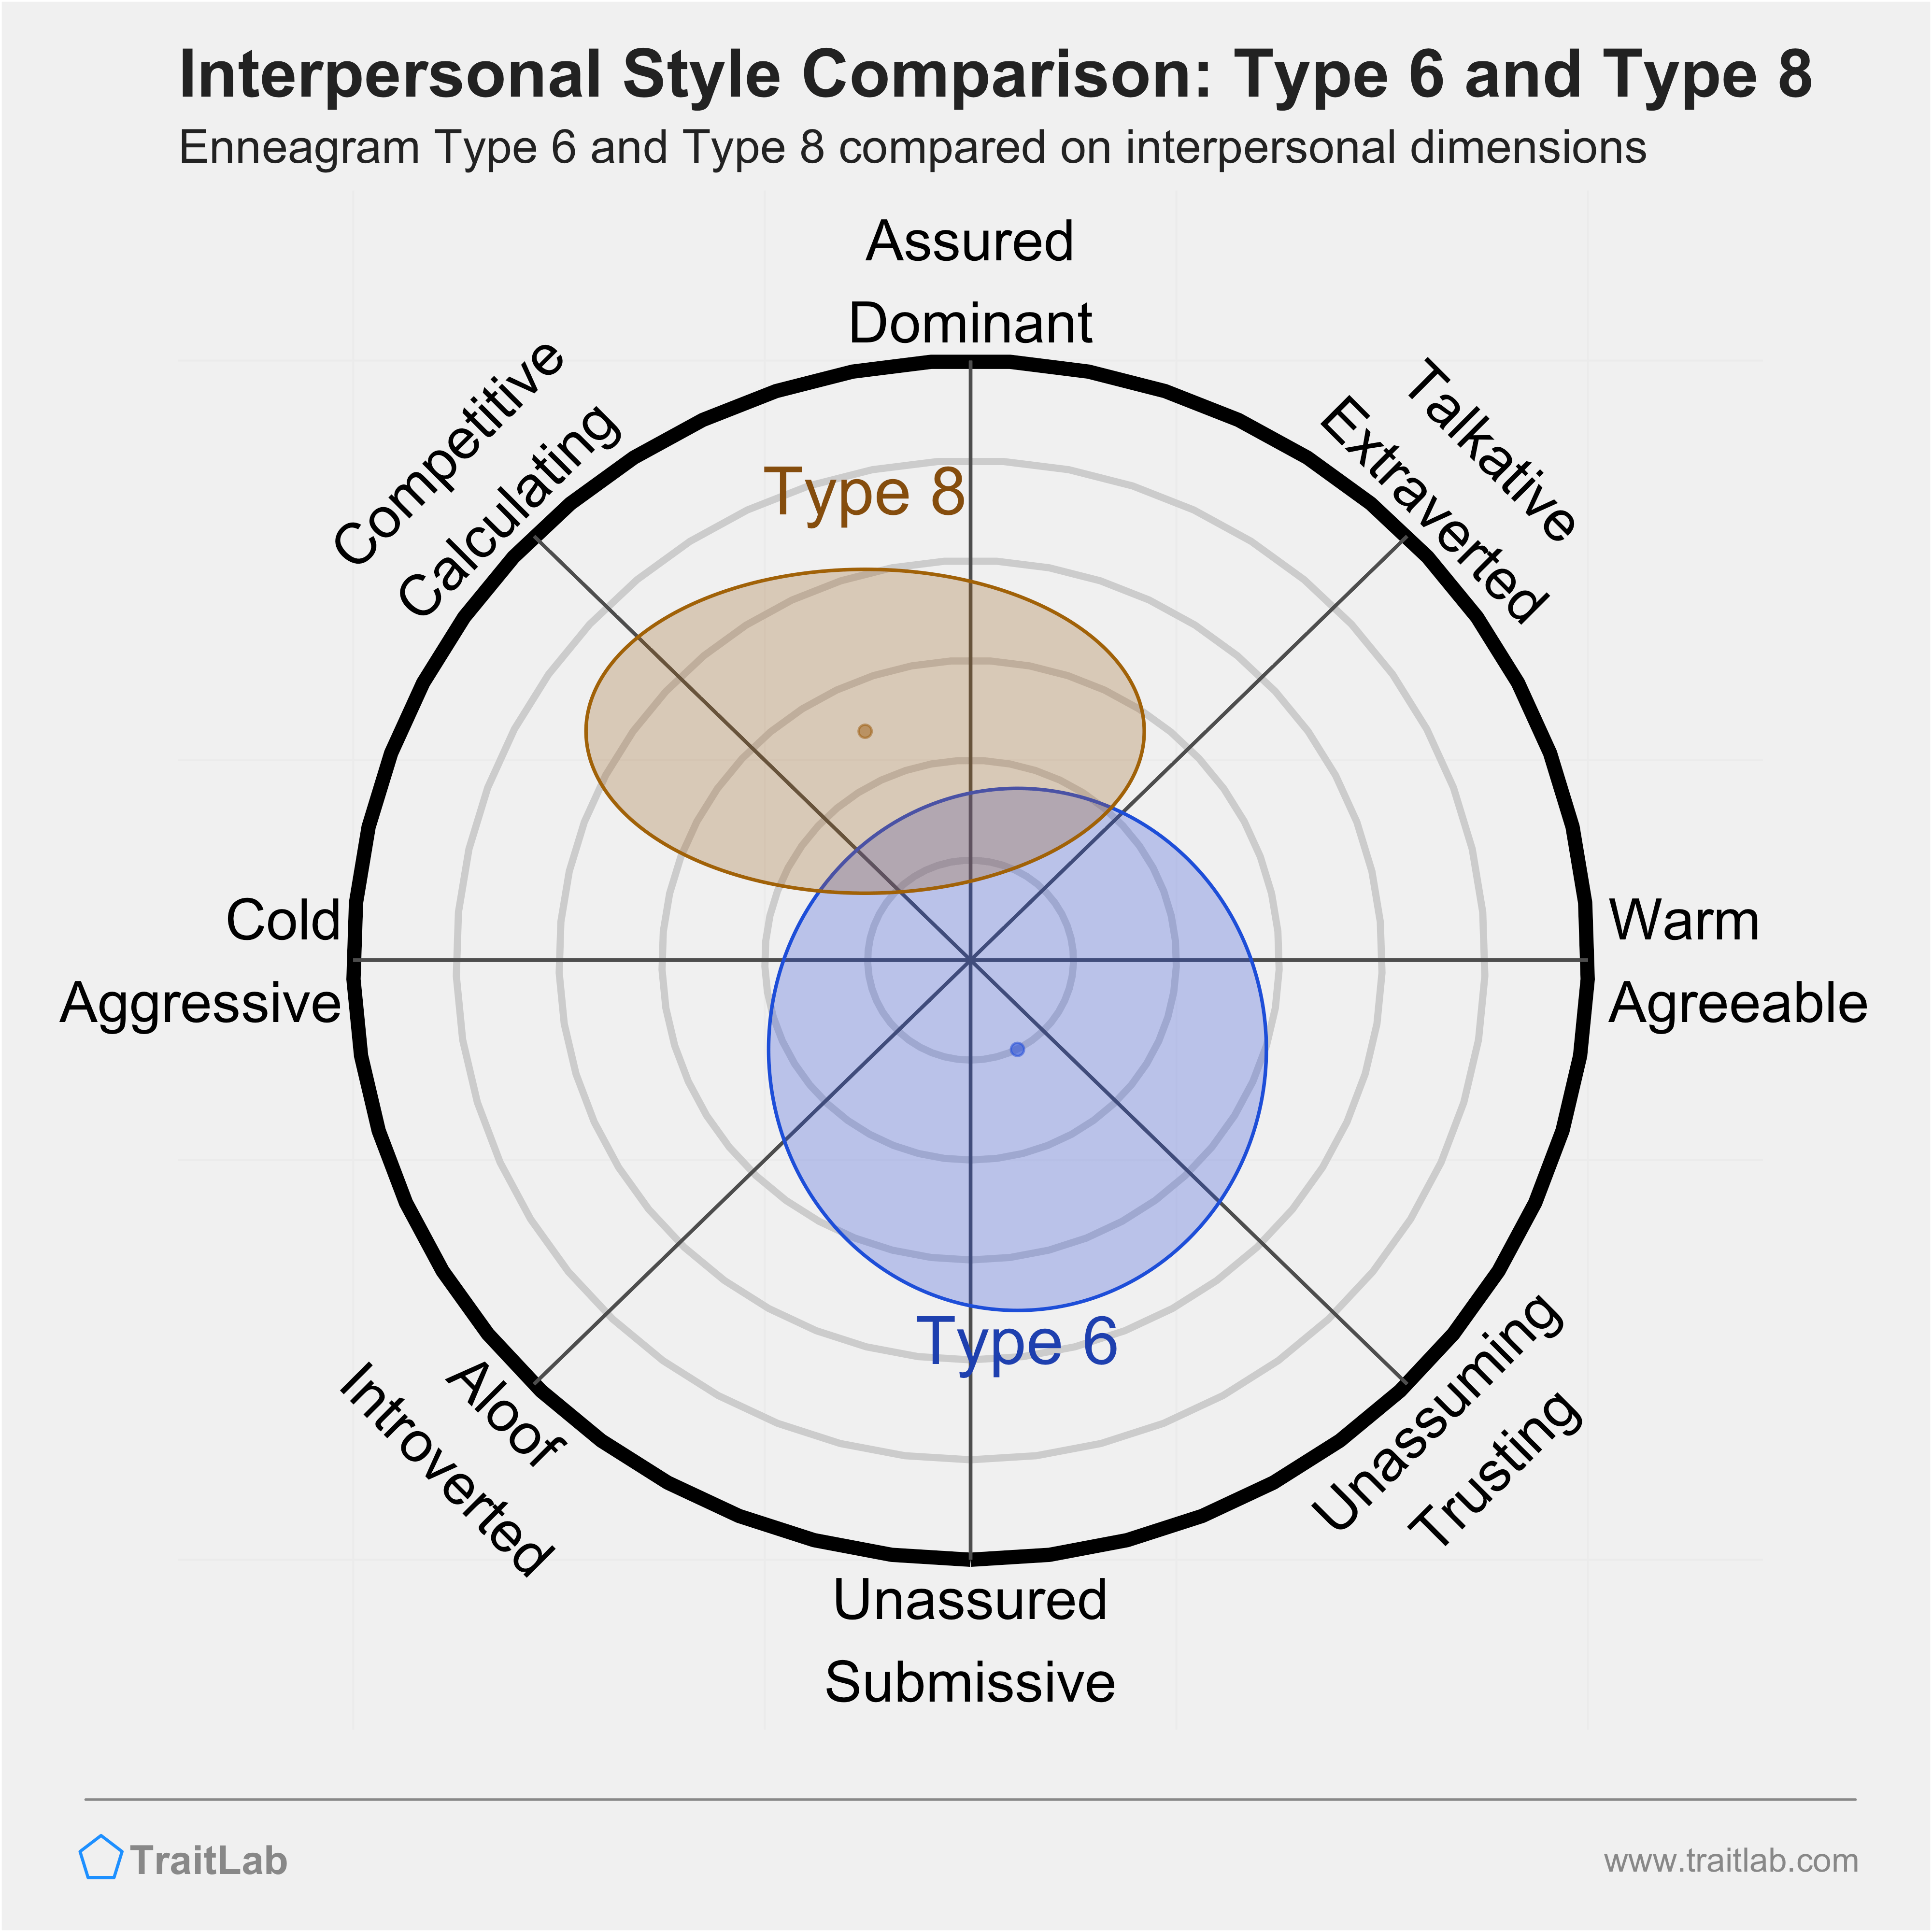 Enneagram Type 6 and Type 8 comparison across interpersonal dimensions